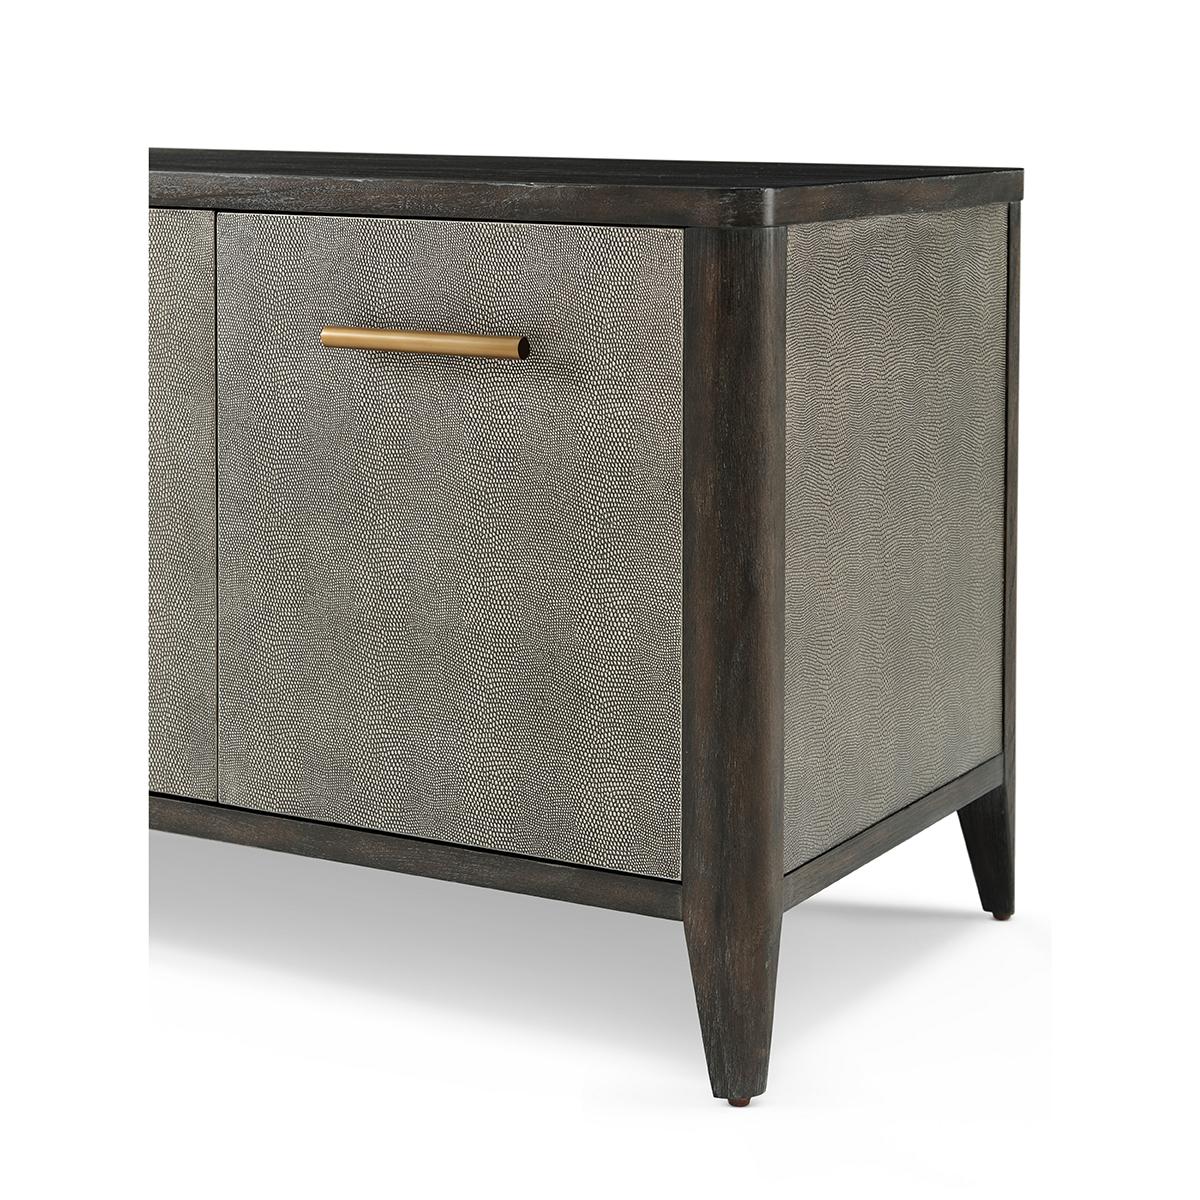 Contemporary Modern Leather Wrapped Media Cabinet